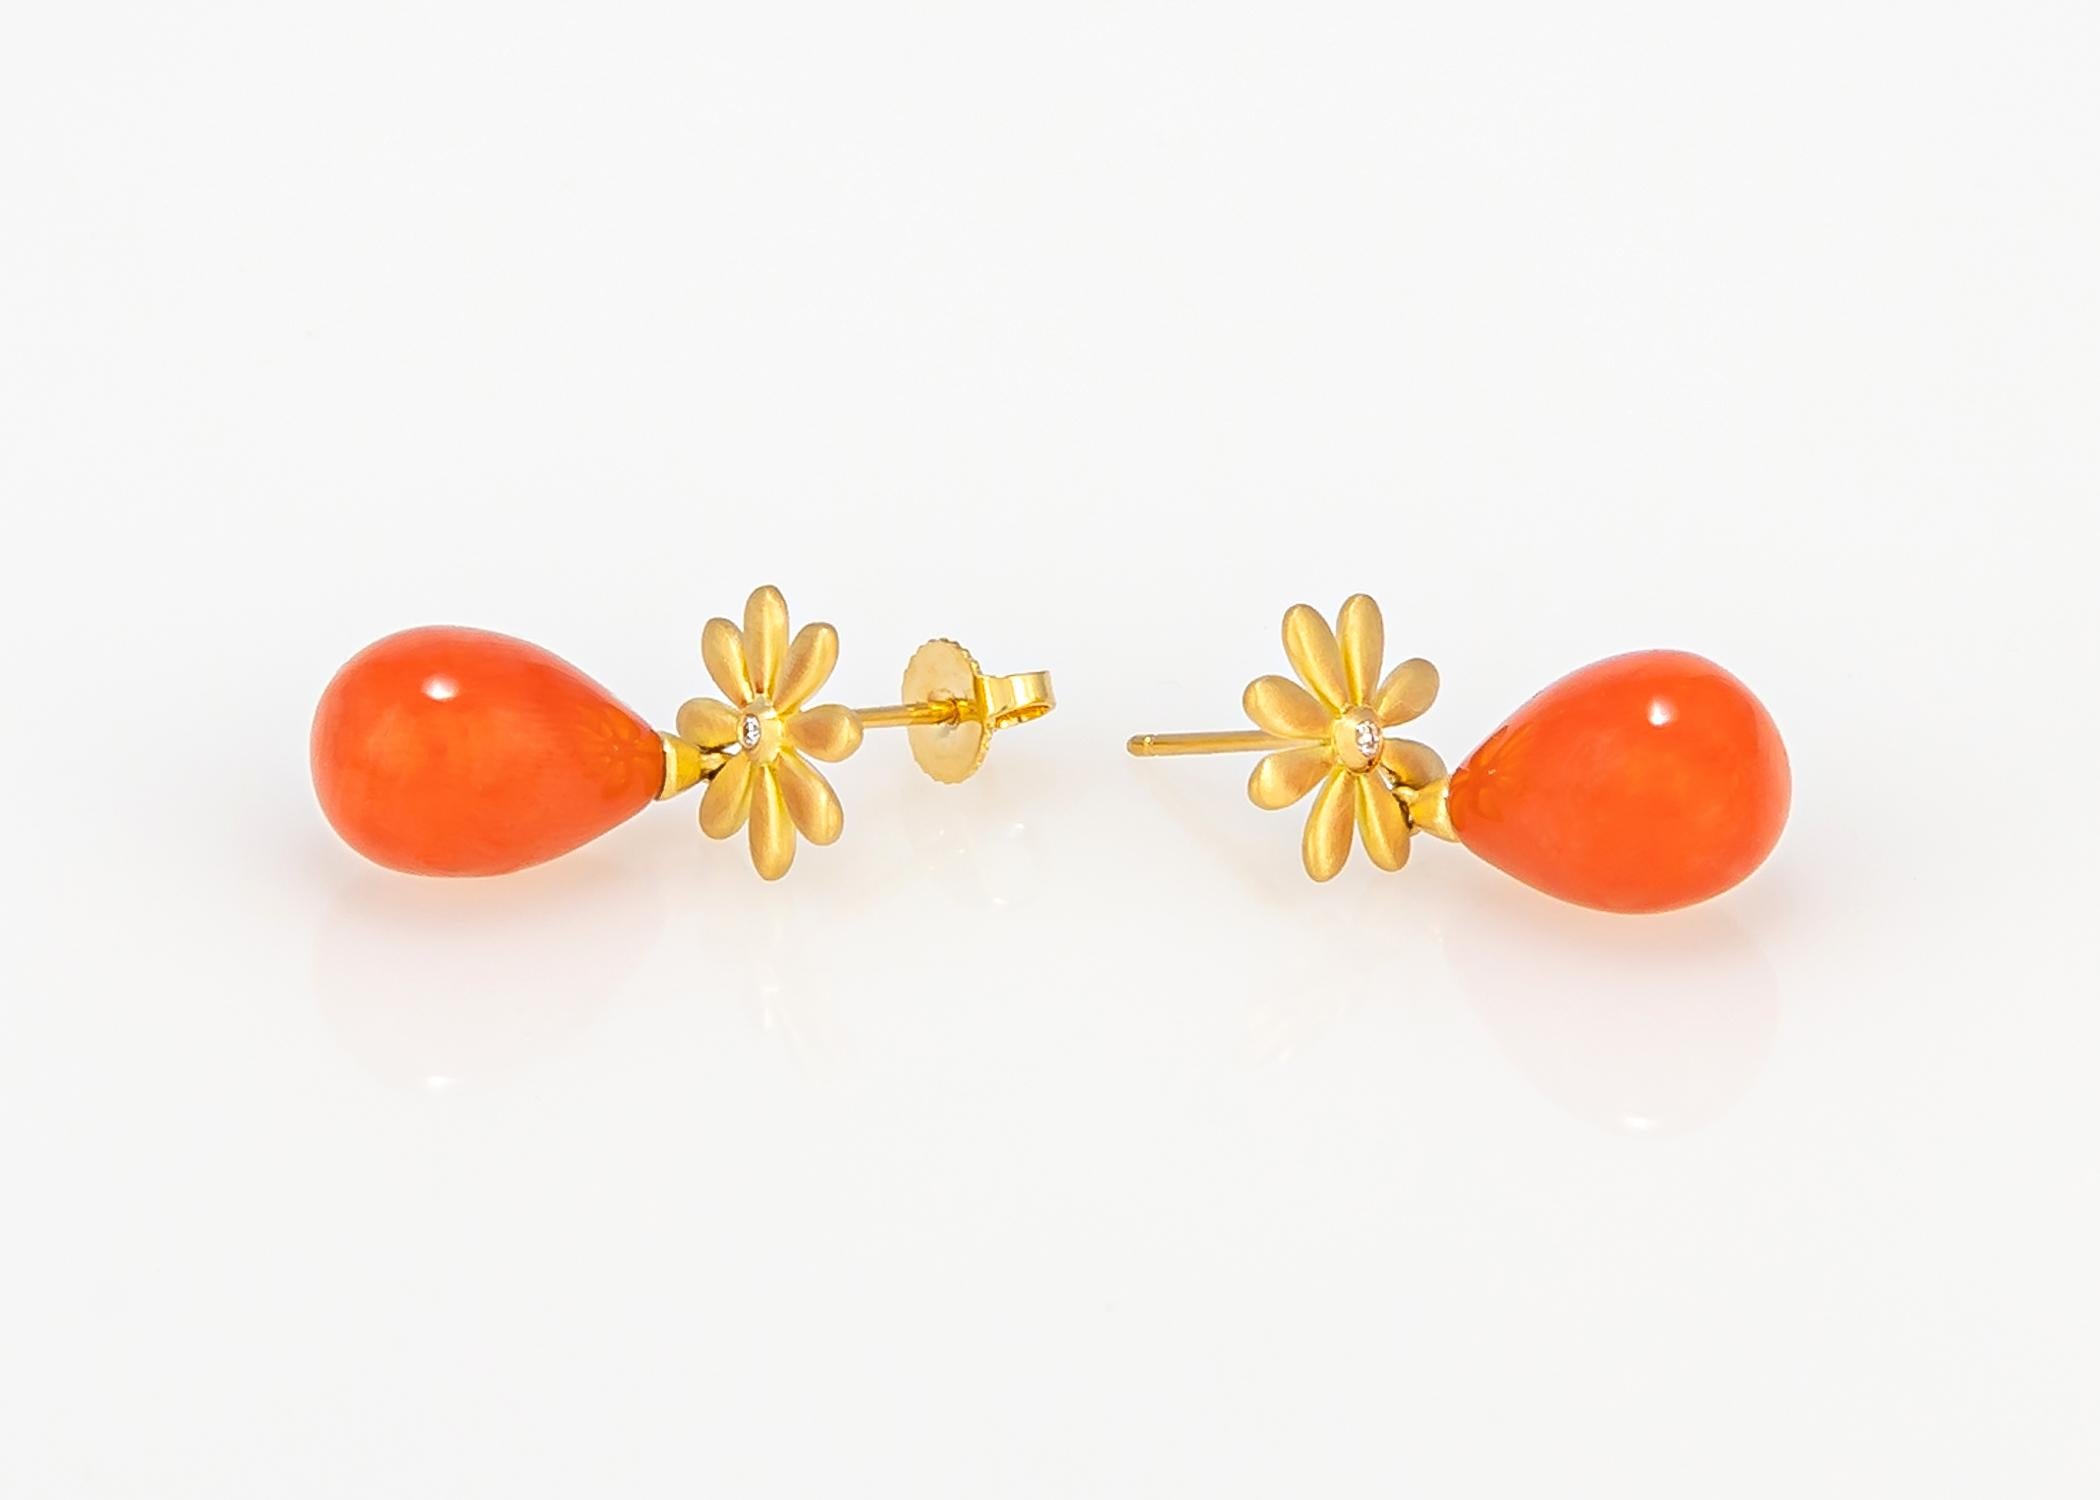 Tiffany & Co. quality and design. At just one little inch in length this gold daisy with it diamond center and vivid orange coral drops will brighten your face and perhaps your day. Chic & simply smart !!!